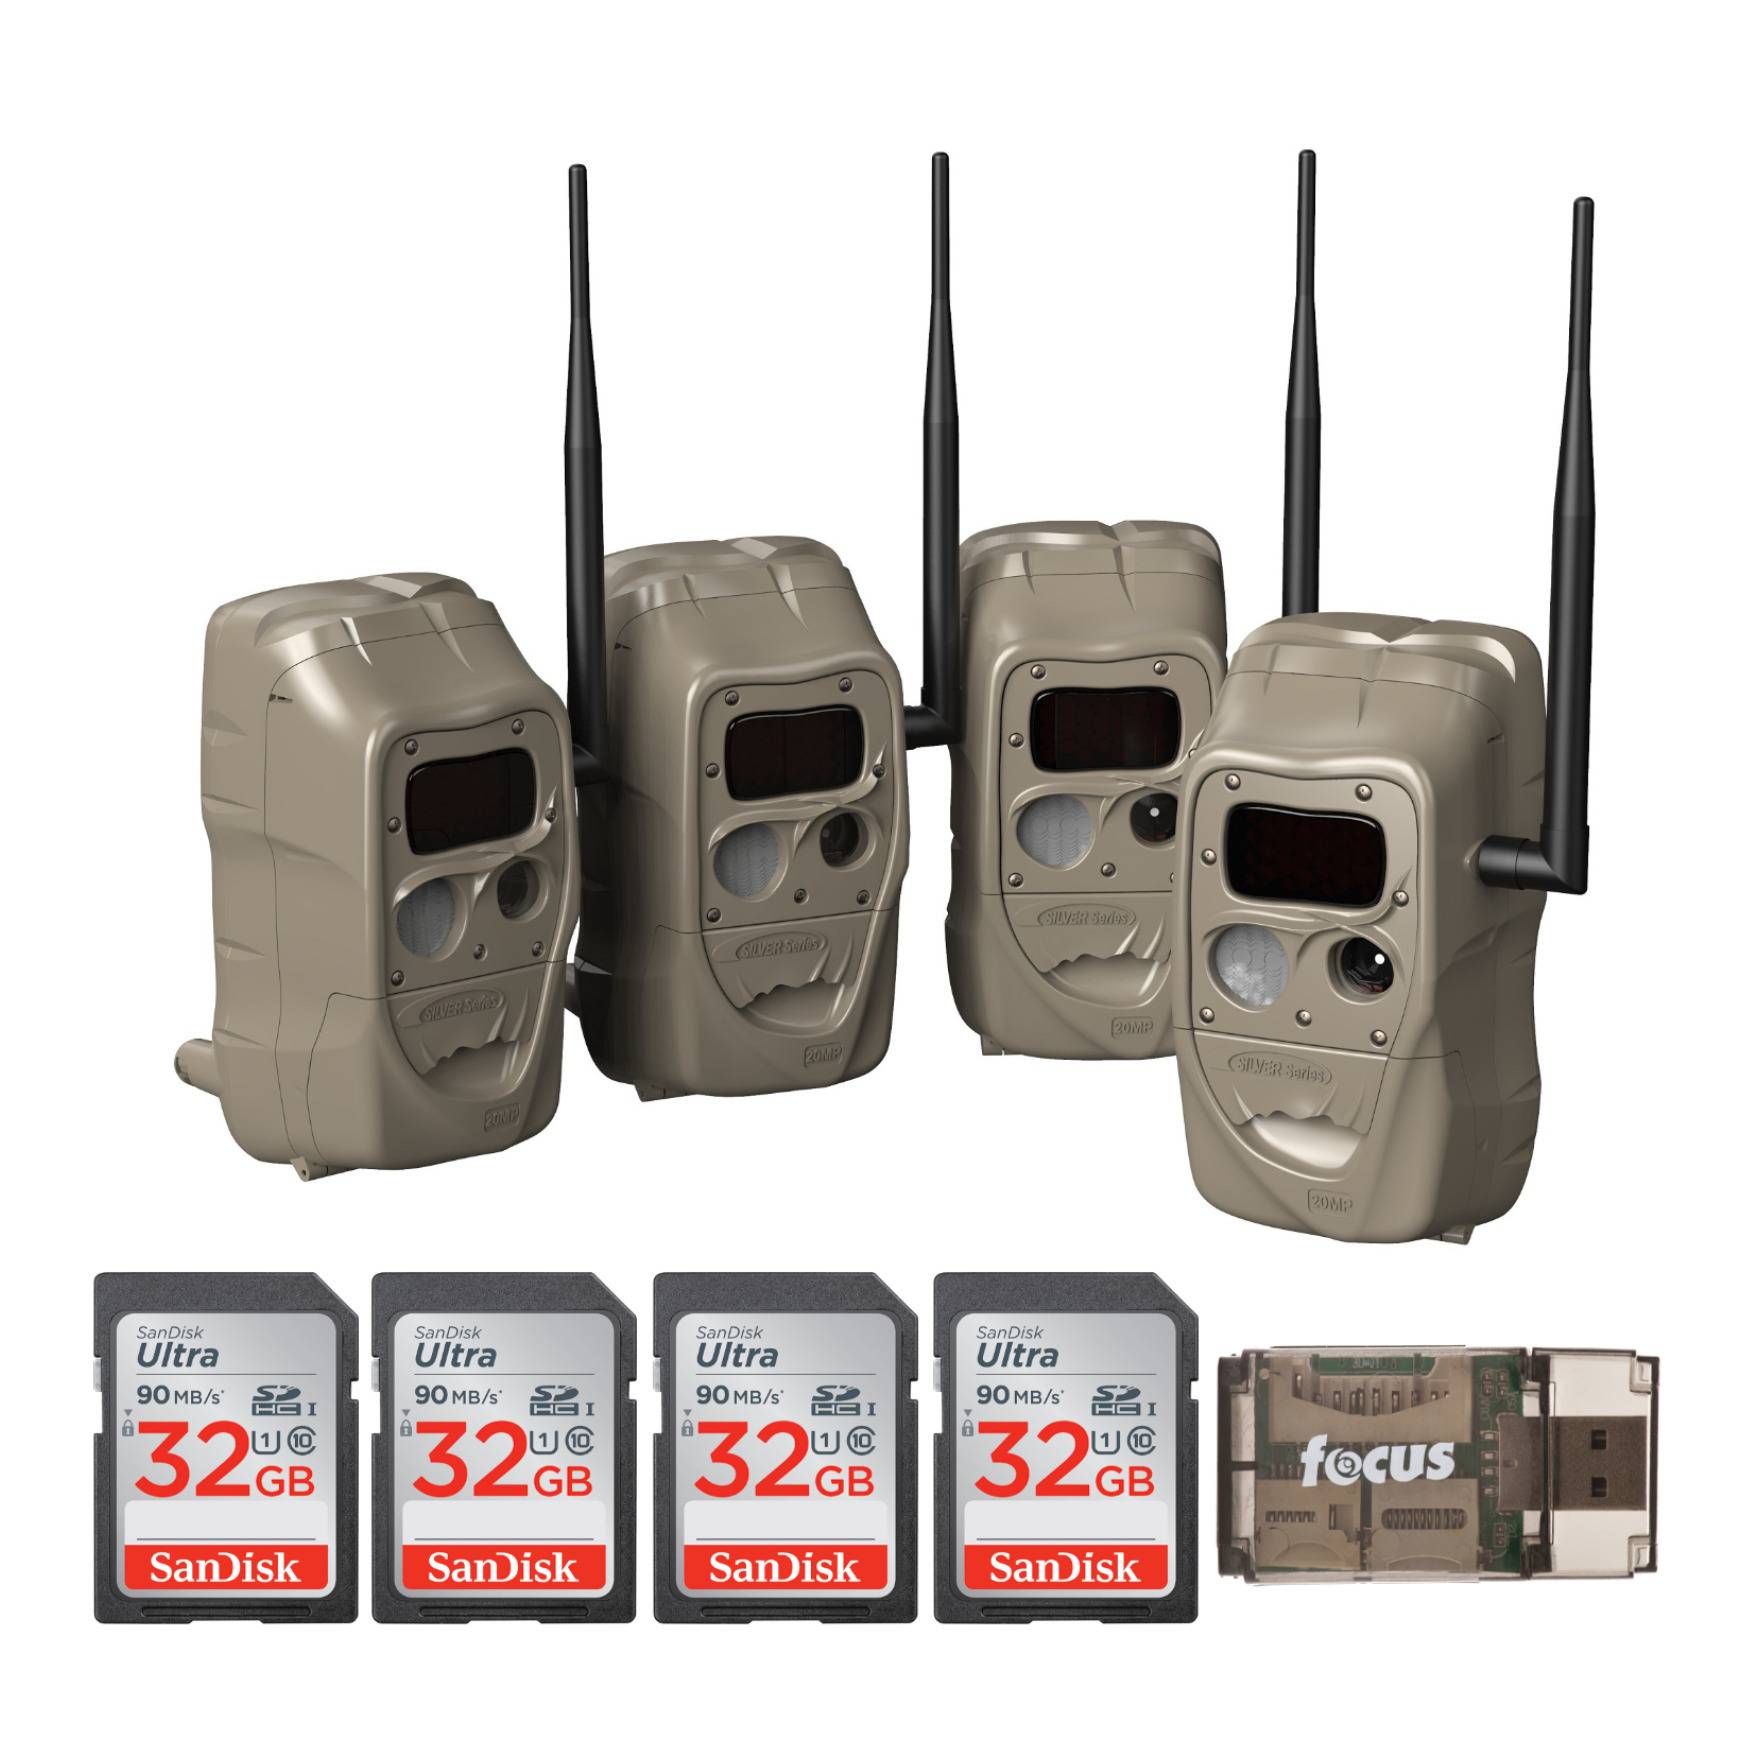 Cuddeback CuddeLink J Series Black Flash Trail Camera (4-Pack) with 32GB SD Cards and Reader